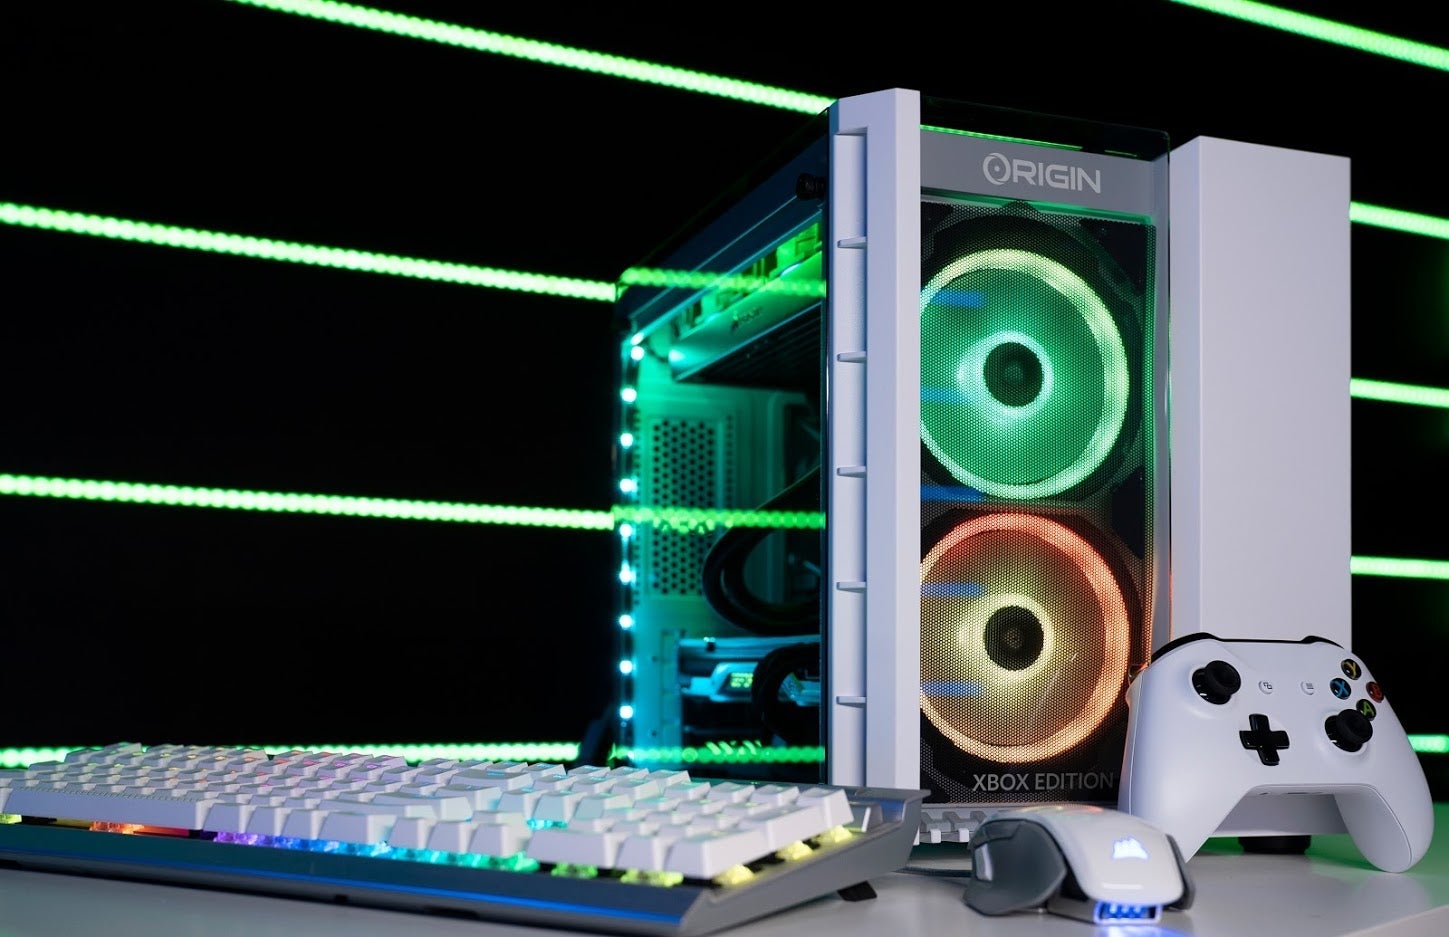 New Gaming PC Comes With Built-In Xbox One Or PS4